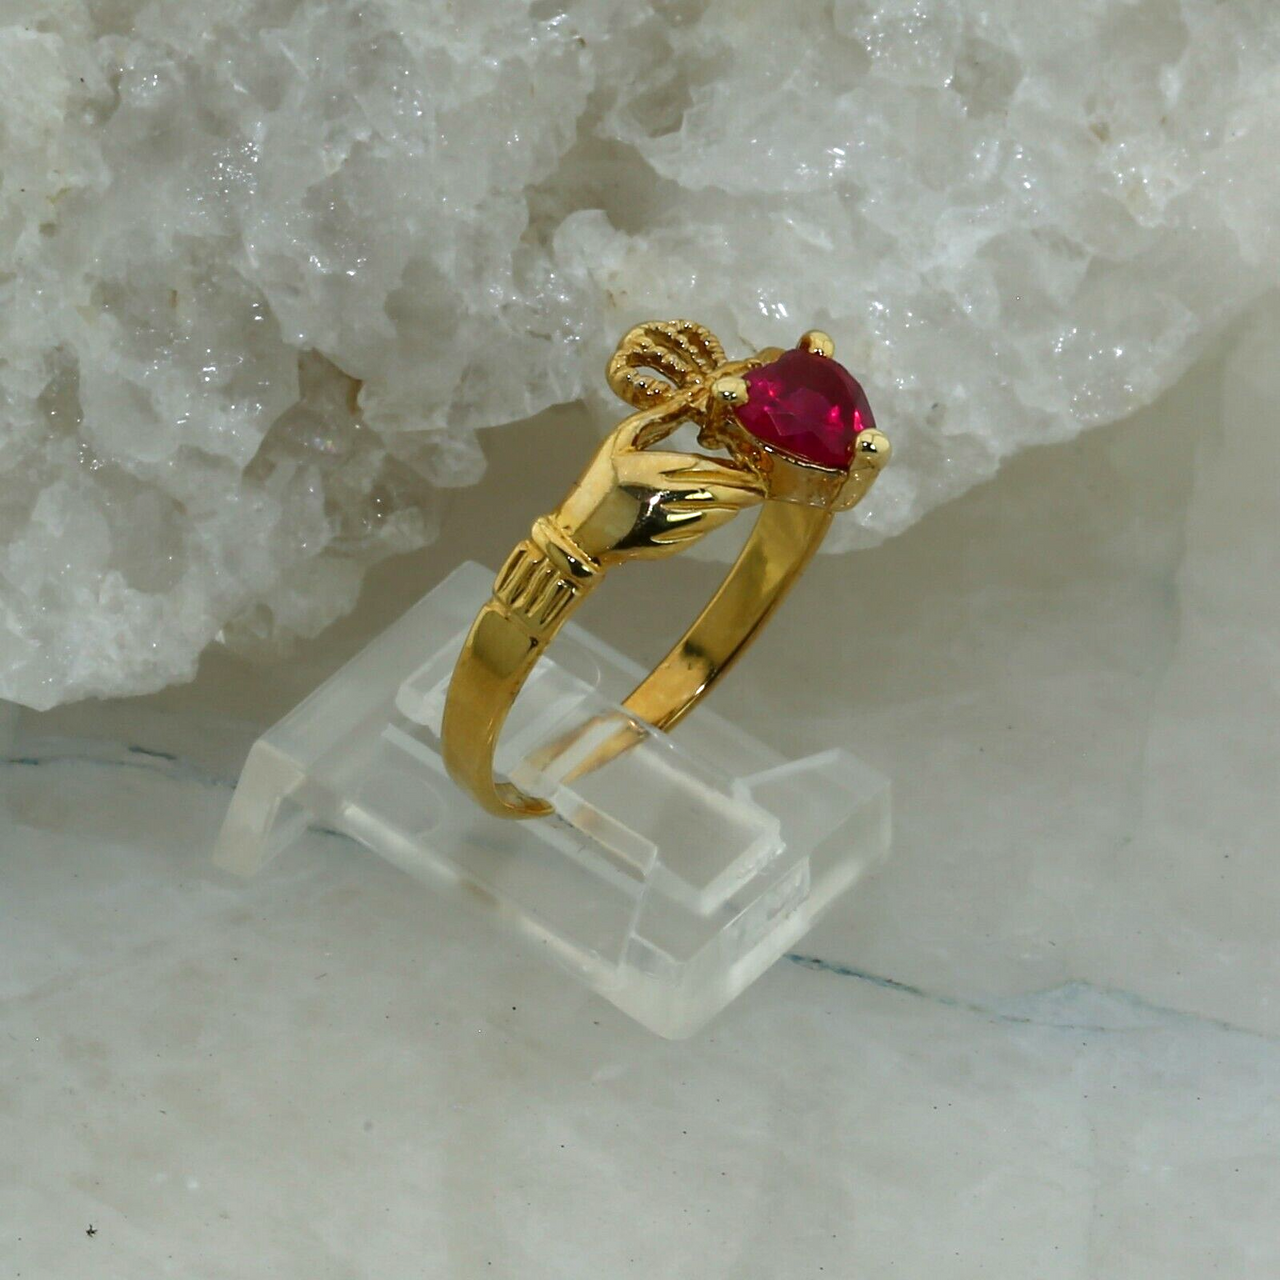 14K Yellow Gold Claddagh Ring w/ Heart Shaped Man Made Ruby, size 8.75